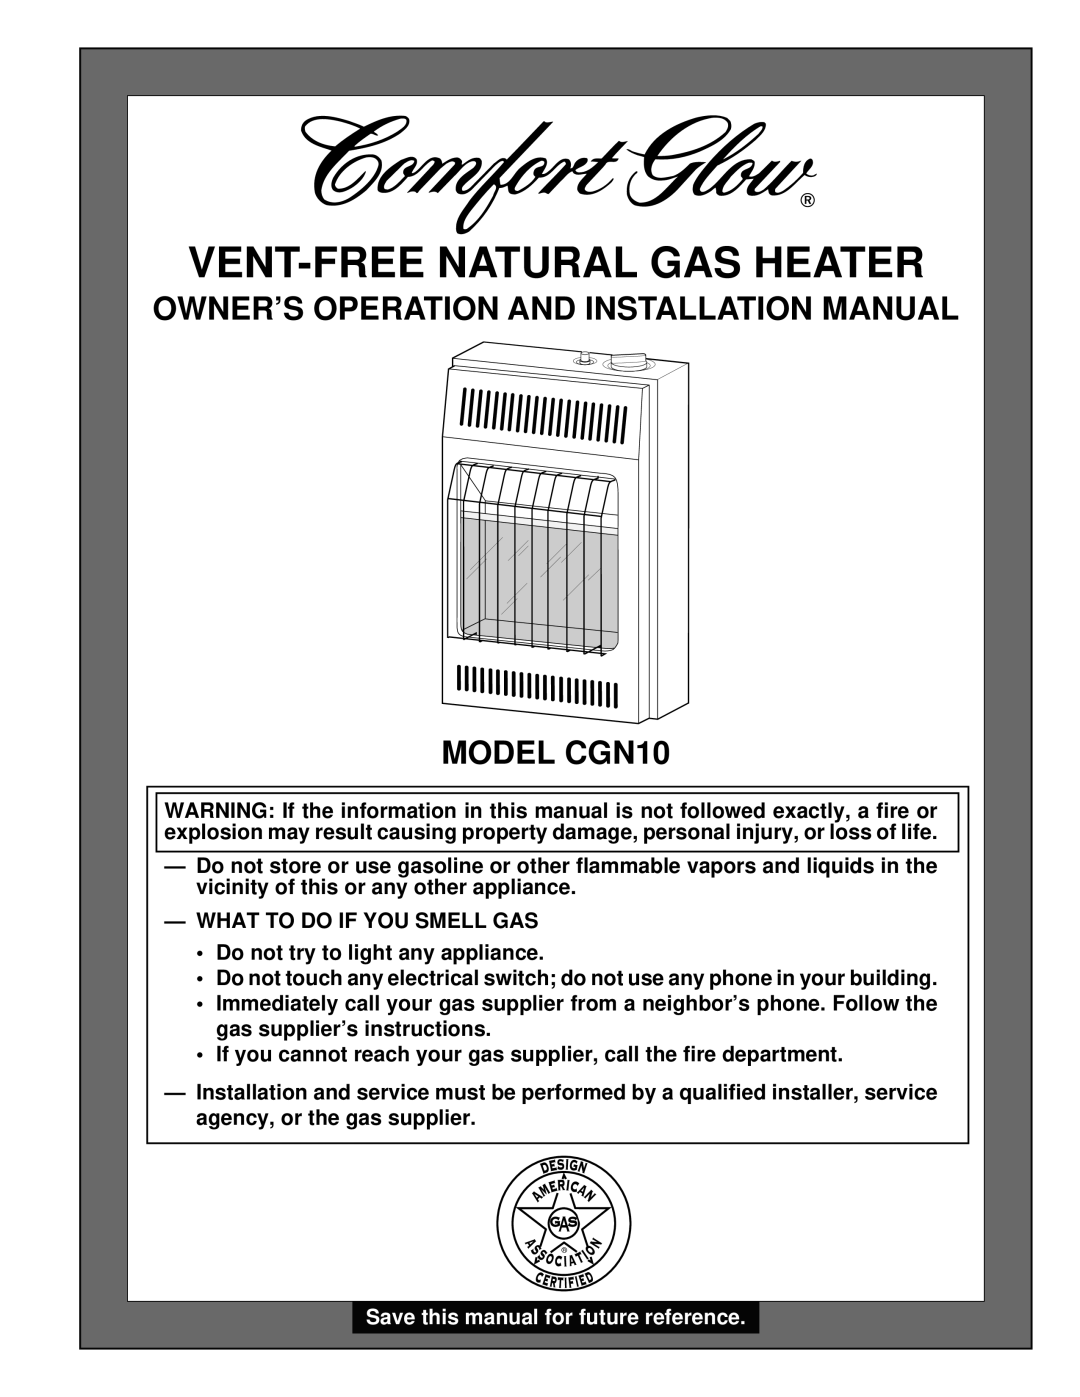 Desa installation manual OWNER’S OPERATION AND INSTALLATION MANUAL MODEL CGN10, Vent-Free Natural Gas Heater 